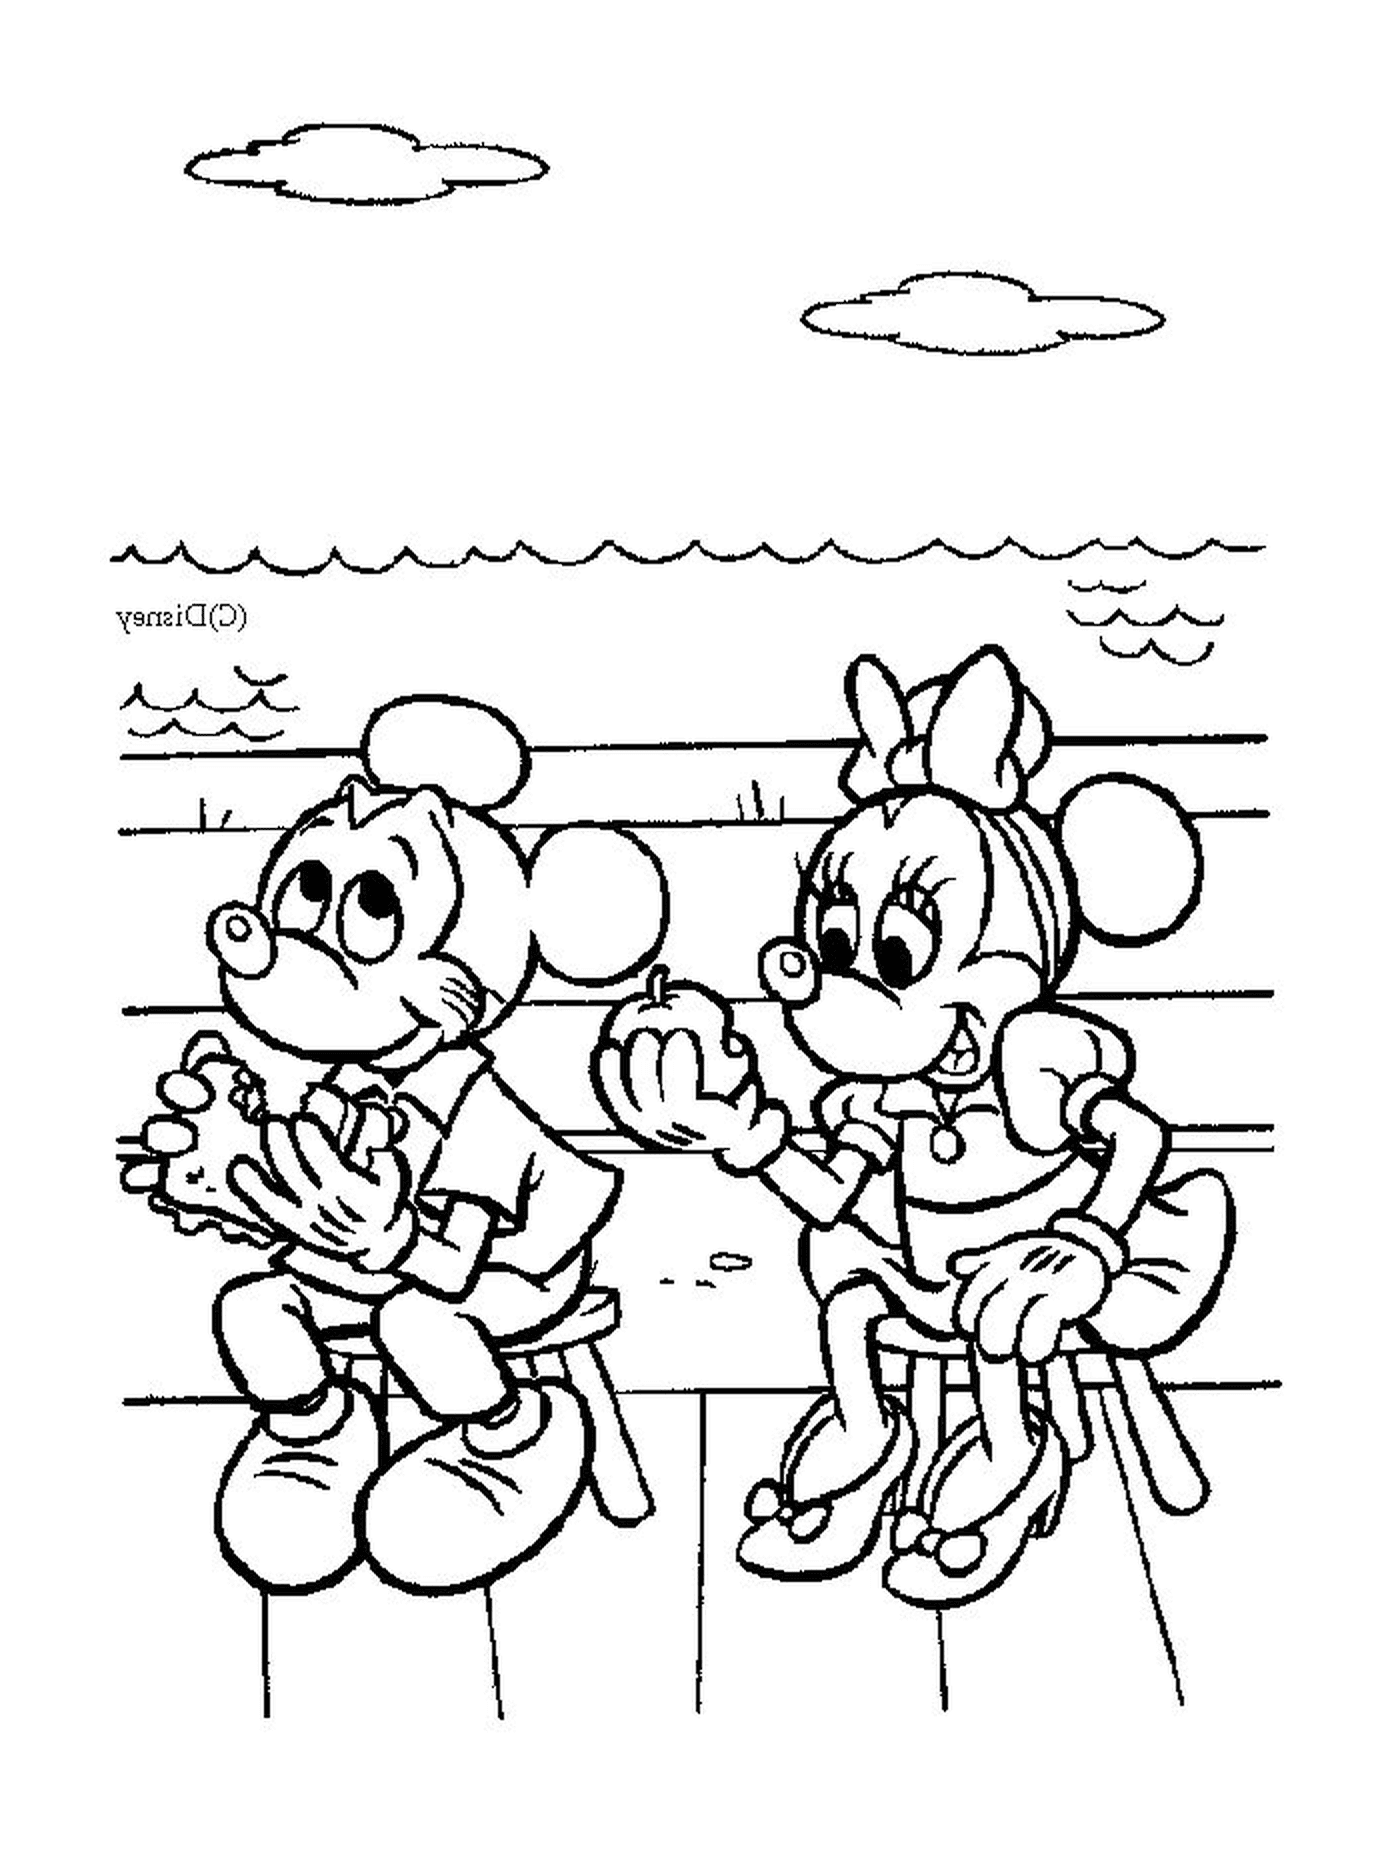  Mickey Mouse and Minnie Mouse sitting on a bench 